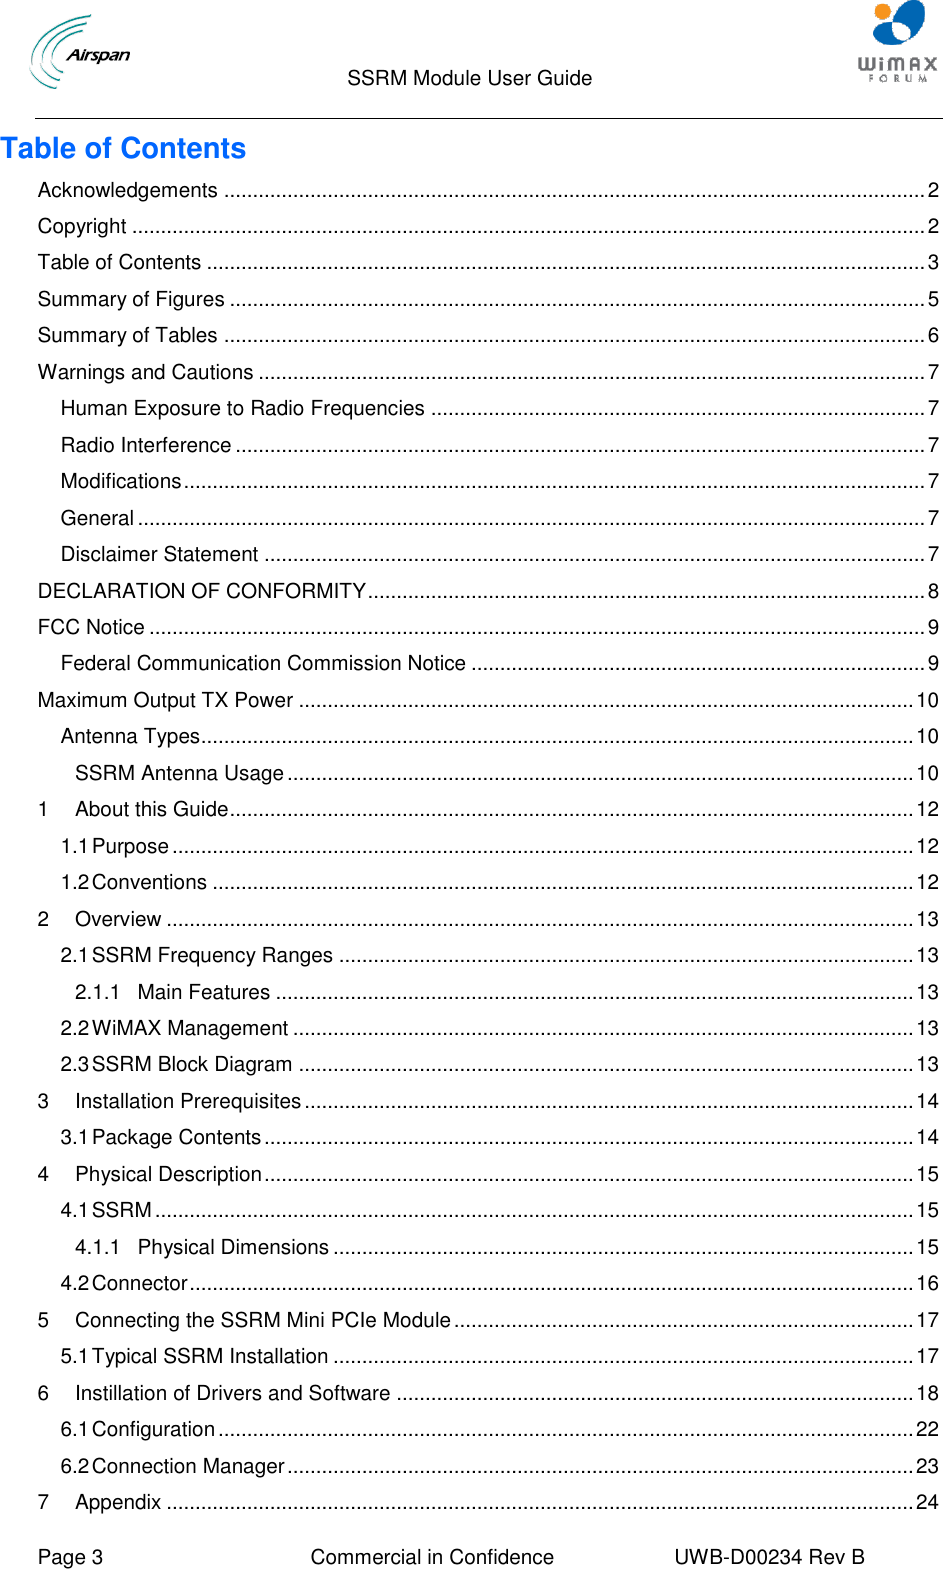                                  SSRM Module User Guide     Page 3  Commercial in Confidence  UWB-D00234 Rev B    Table of Contents Acknowledgements .......................................................................................................................... 2 Copyright .......................................................................................................................................... 2 Table of Contents ............................................................................................................................. 3 Summary of Figures ......................................................................................................................... 5 Summary of Tables .......................................................................................................................... 6 Warnings and Cautions .................................................................................................................... 7 Human Exposure to Radio Frequencies ...................................................................................... 7 Radio Interference ........................................................................................................................ 7 Modifications ................................................................................................................................. 7 General ......................................................................................................................................... 7 Disclaimer Statement ................................................................................................................... 7 DECLARATION OF CONFORMITY ................................................................................................. 8 FCC Notice ....................................................................................................................................... 9 Federal Communication Commission Notice ............................................................................... 9 Maximum Output TX Power ........................................................................................................... 10 Antenna Types............................................................................................................................ 10 SSRM Antenna Usage ............................................................................................................. 10 1 About this Guide ....................................................................................................................... 12 1.1 Purpose ................................................................................................................................. 12 1.2 Conventions .......................................................................................................................... 12 2 Overview .................................................................................................................................. 13 2.1 SSRM Frequency Ranges .................................................................................................... 13 2.1.1 Main Features ............................................................................................................... 13 2.2 WiMAX Management ............................................................................................................ 13 2.3 SSRM Block Diagram ........................................................................................................... 13 3 Installation Prerequisites .......................................................................................................... 14 3.1 Package Contents ................................................................................................................. 14 4 Physical Description ................................................................................................................. 15 4.1 SSRM .................................................................................................................................... 15 4.1.1 Physical Dimensions ..................................................................................................... 15 4.2 Connector .............................................................................................................................. 16 5 Connecting the SSRM Mini PCIe Module ................................................................................ 17 5.1 Typical SSRM Installation ..................................................................................................... 17 6 Instillation of Drivers and Software .......................................................................................... 18 6.1 Configuration ......................................................................................................................... 22 6.2 Connection Manager ............................................................................................................. 23 7 Appendix .................................................................................................................................. 24 